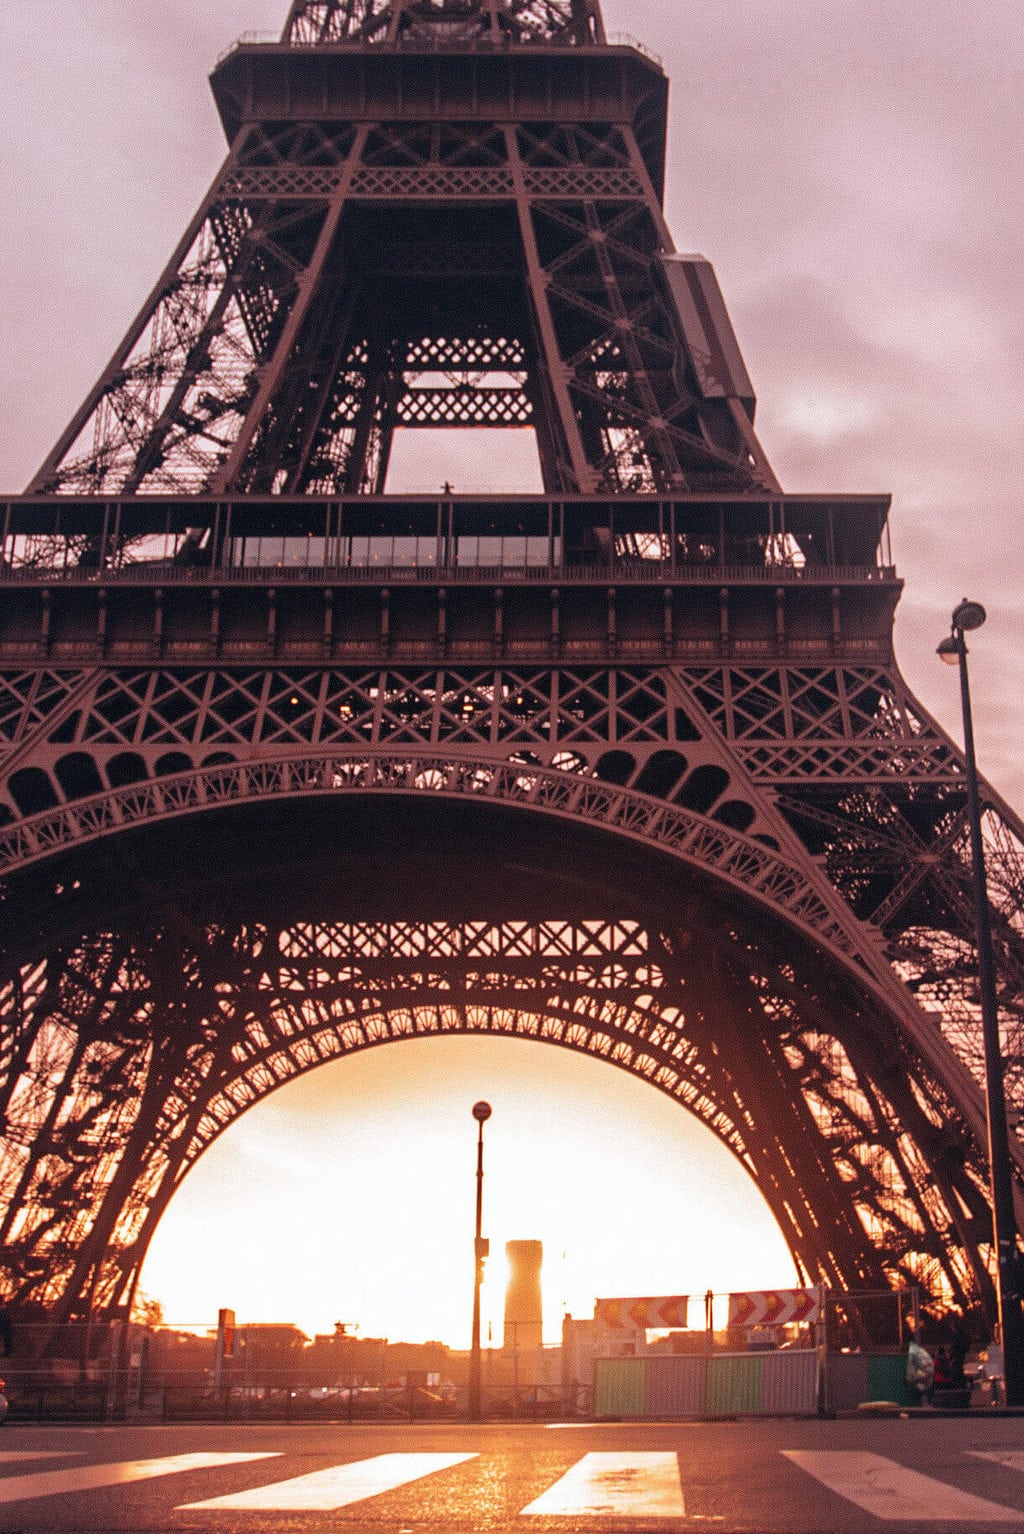 Eiffel Tower For Iphone Wallpapers